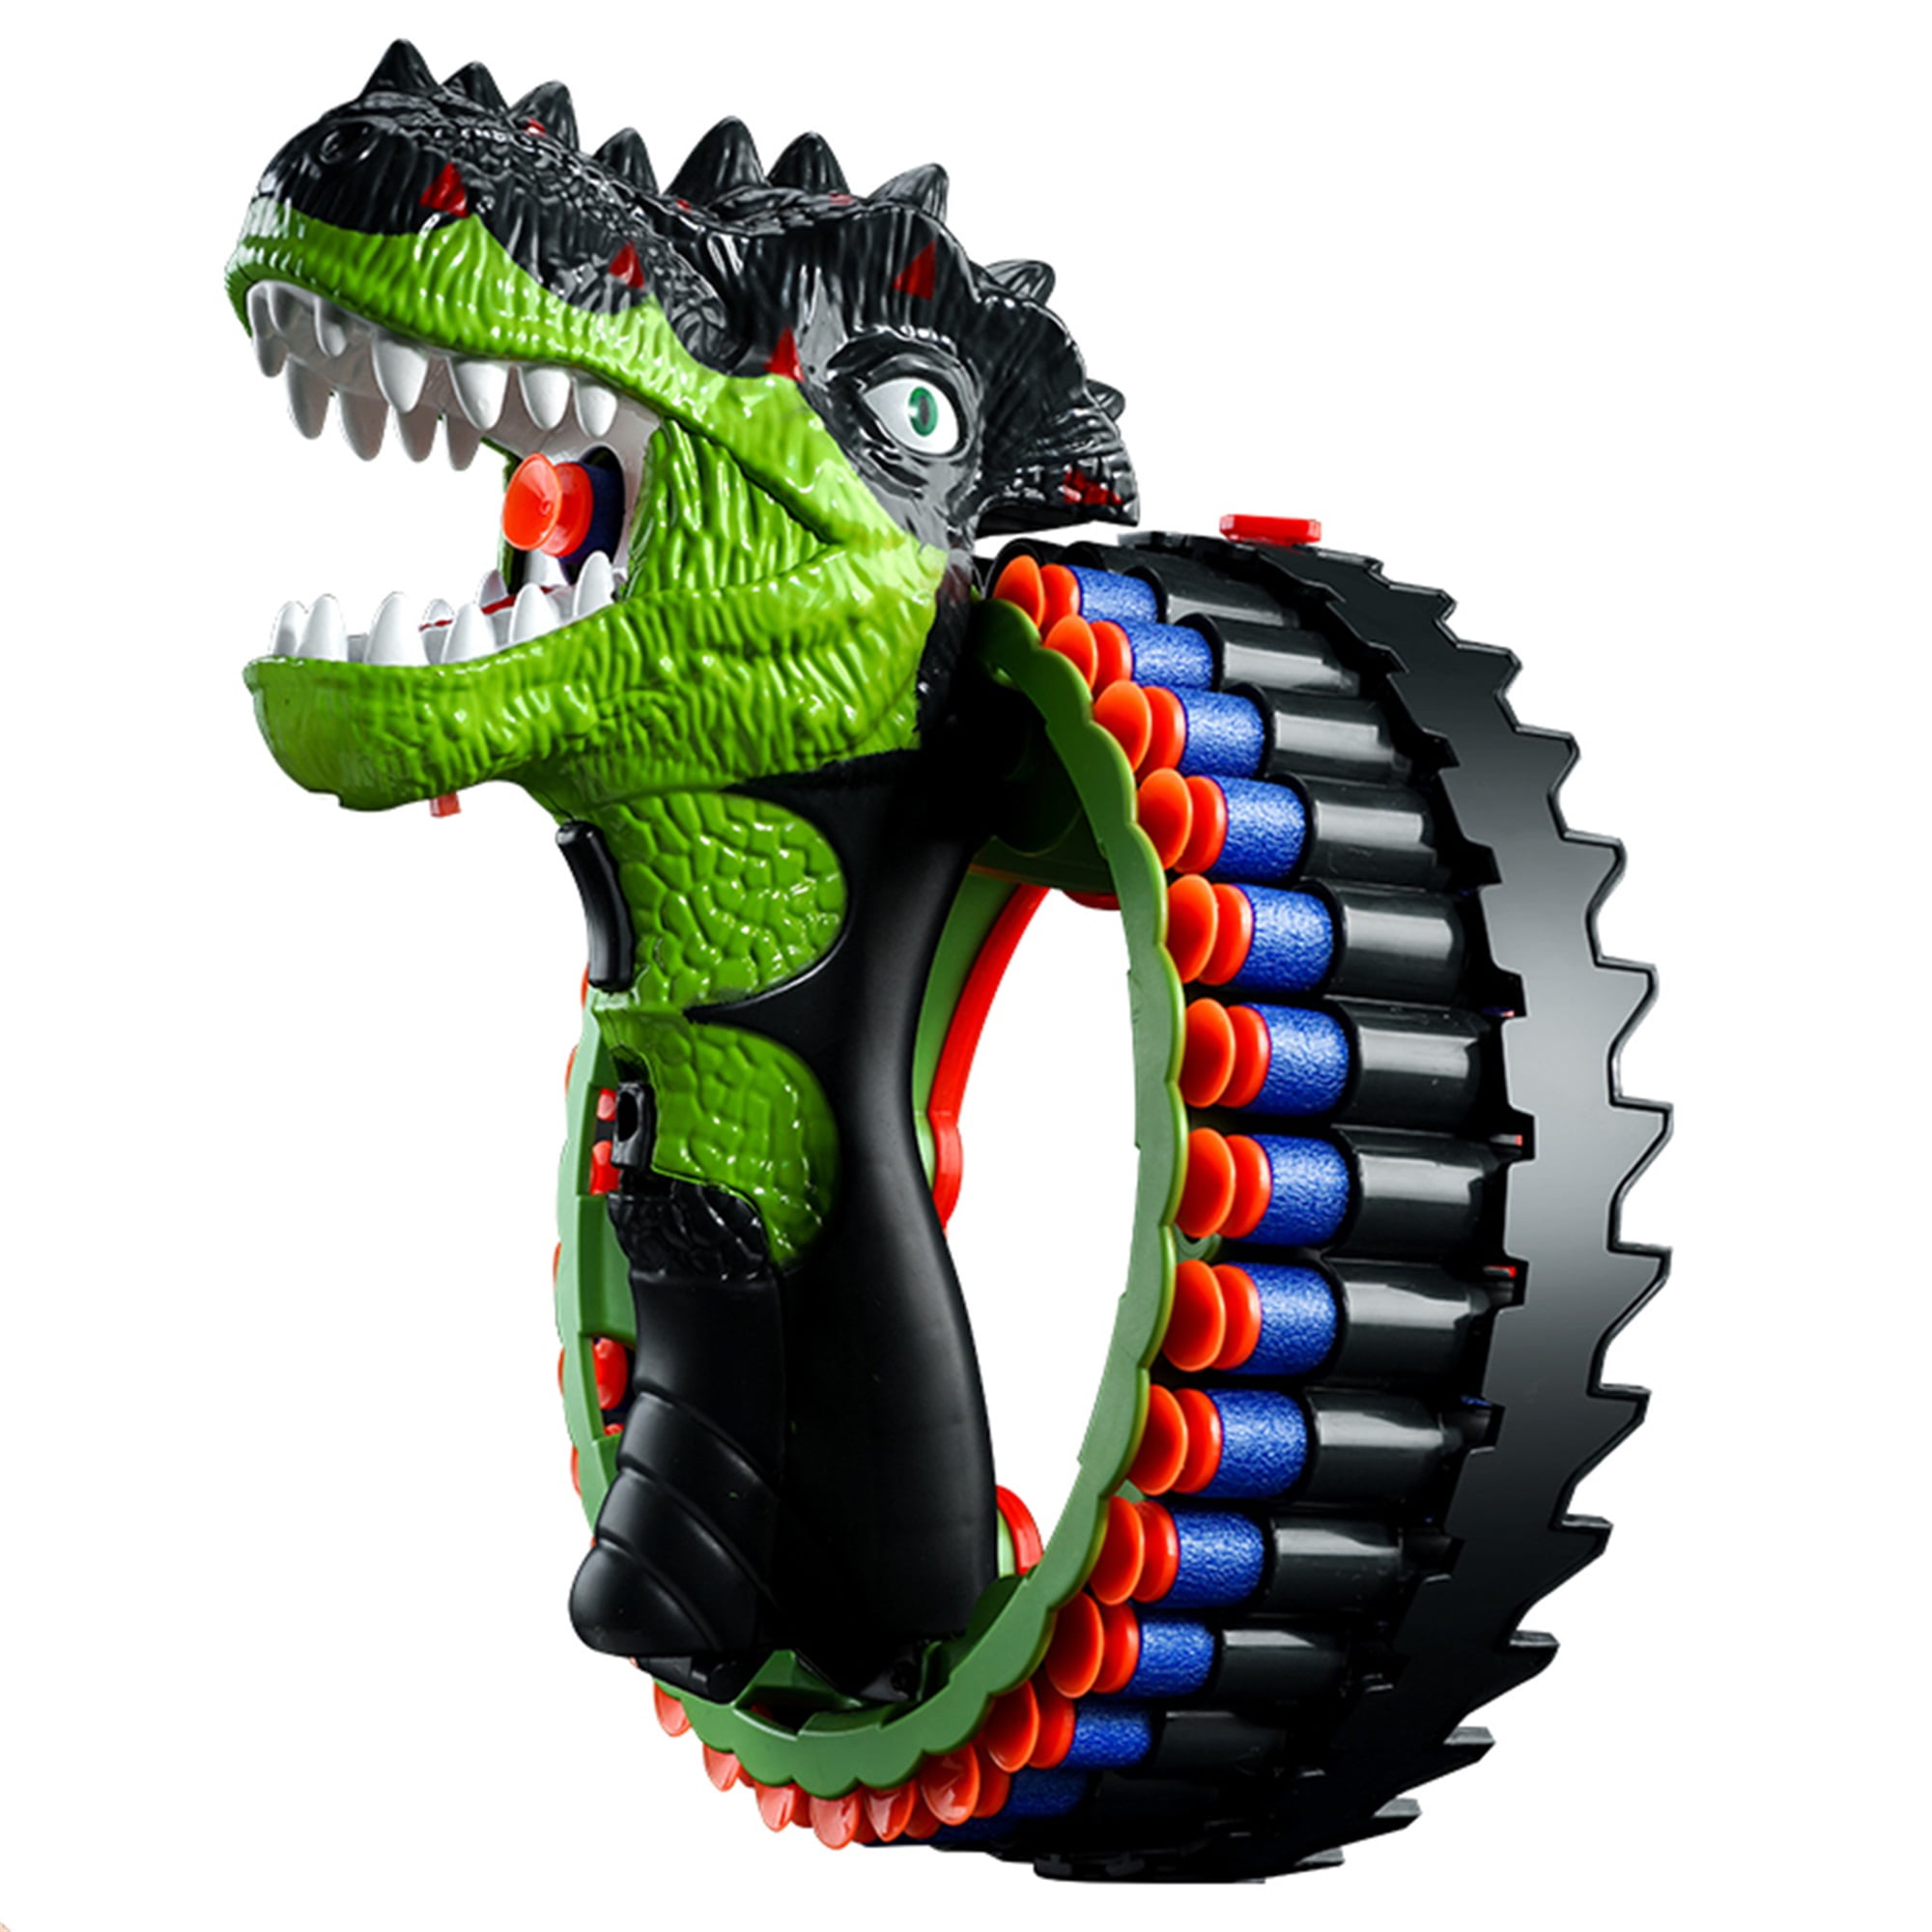 Dinosaur Shooting Game Gun Toy with 34 Soft EVA Dart Bullets Dino Rotating Blaster Wristband Rechargeable Bracelet for Kids, Teens, Adults (Green)